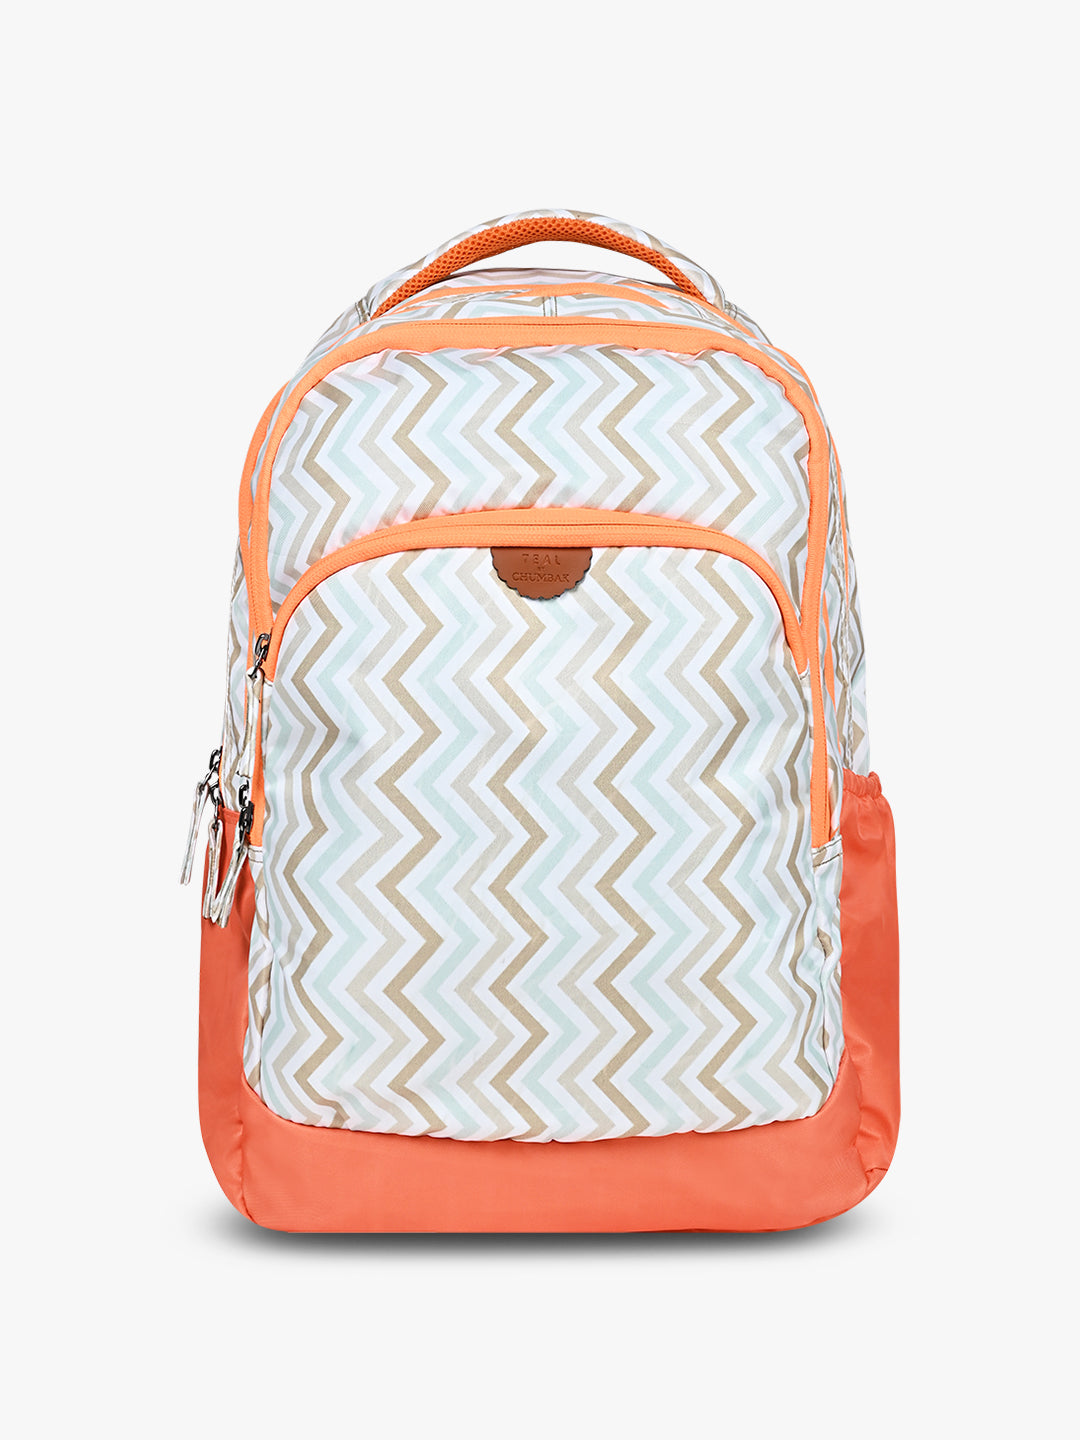 TEAL BY CHUMBAK Unisex Laptop Backpack | White